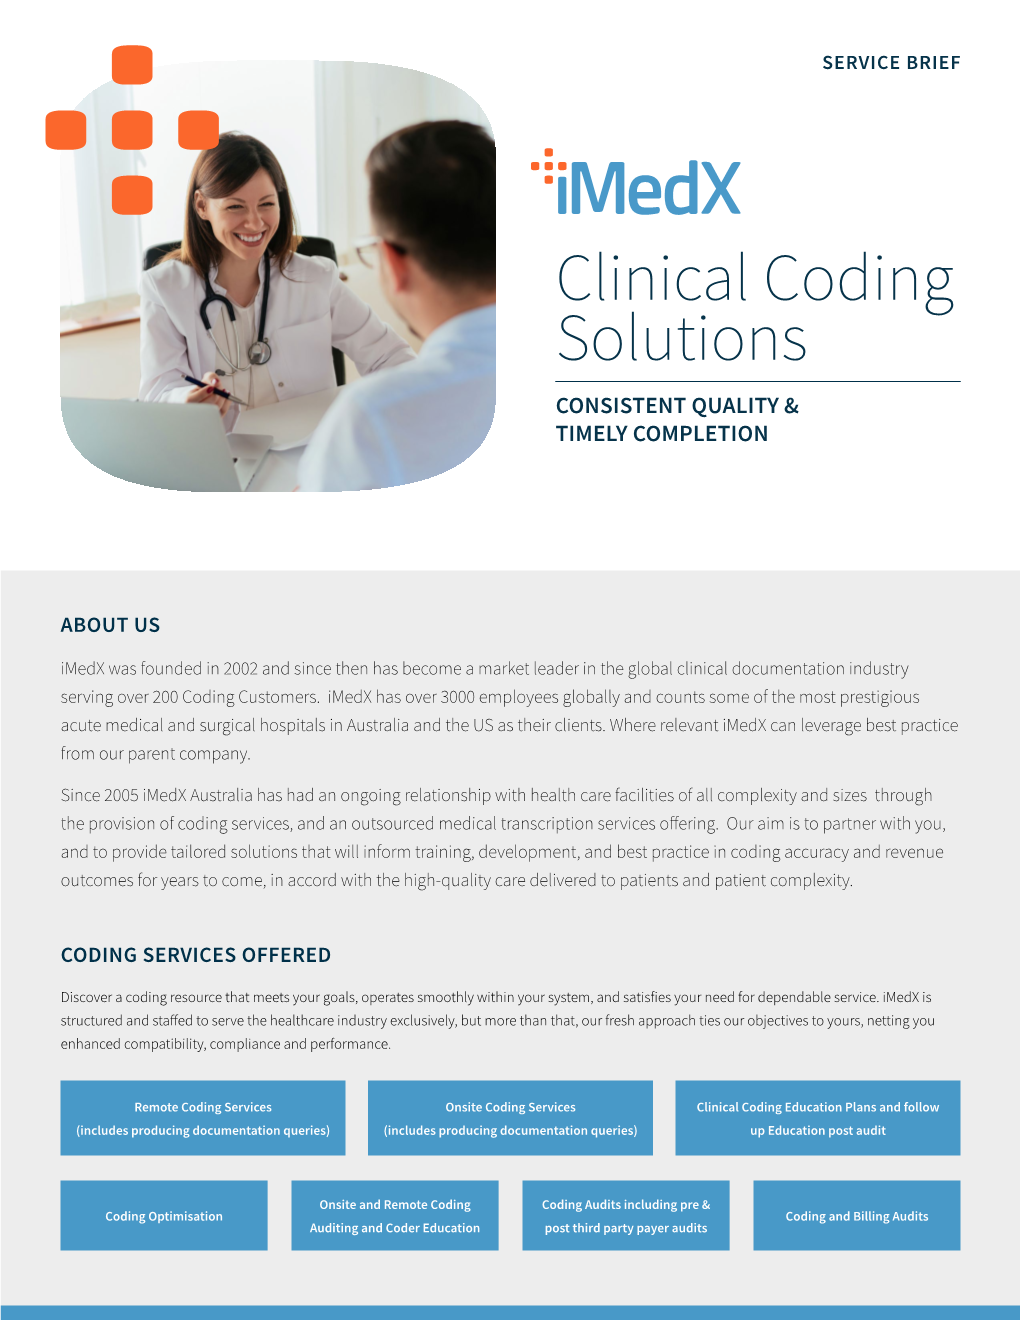 Clinical Coding Solutions CONSISTENT QUALITY & TIMELY COMPLETION